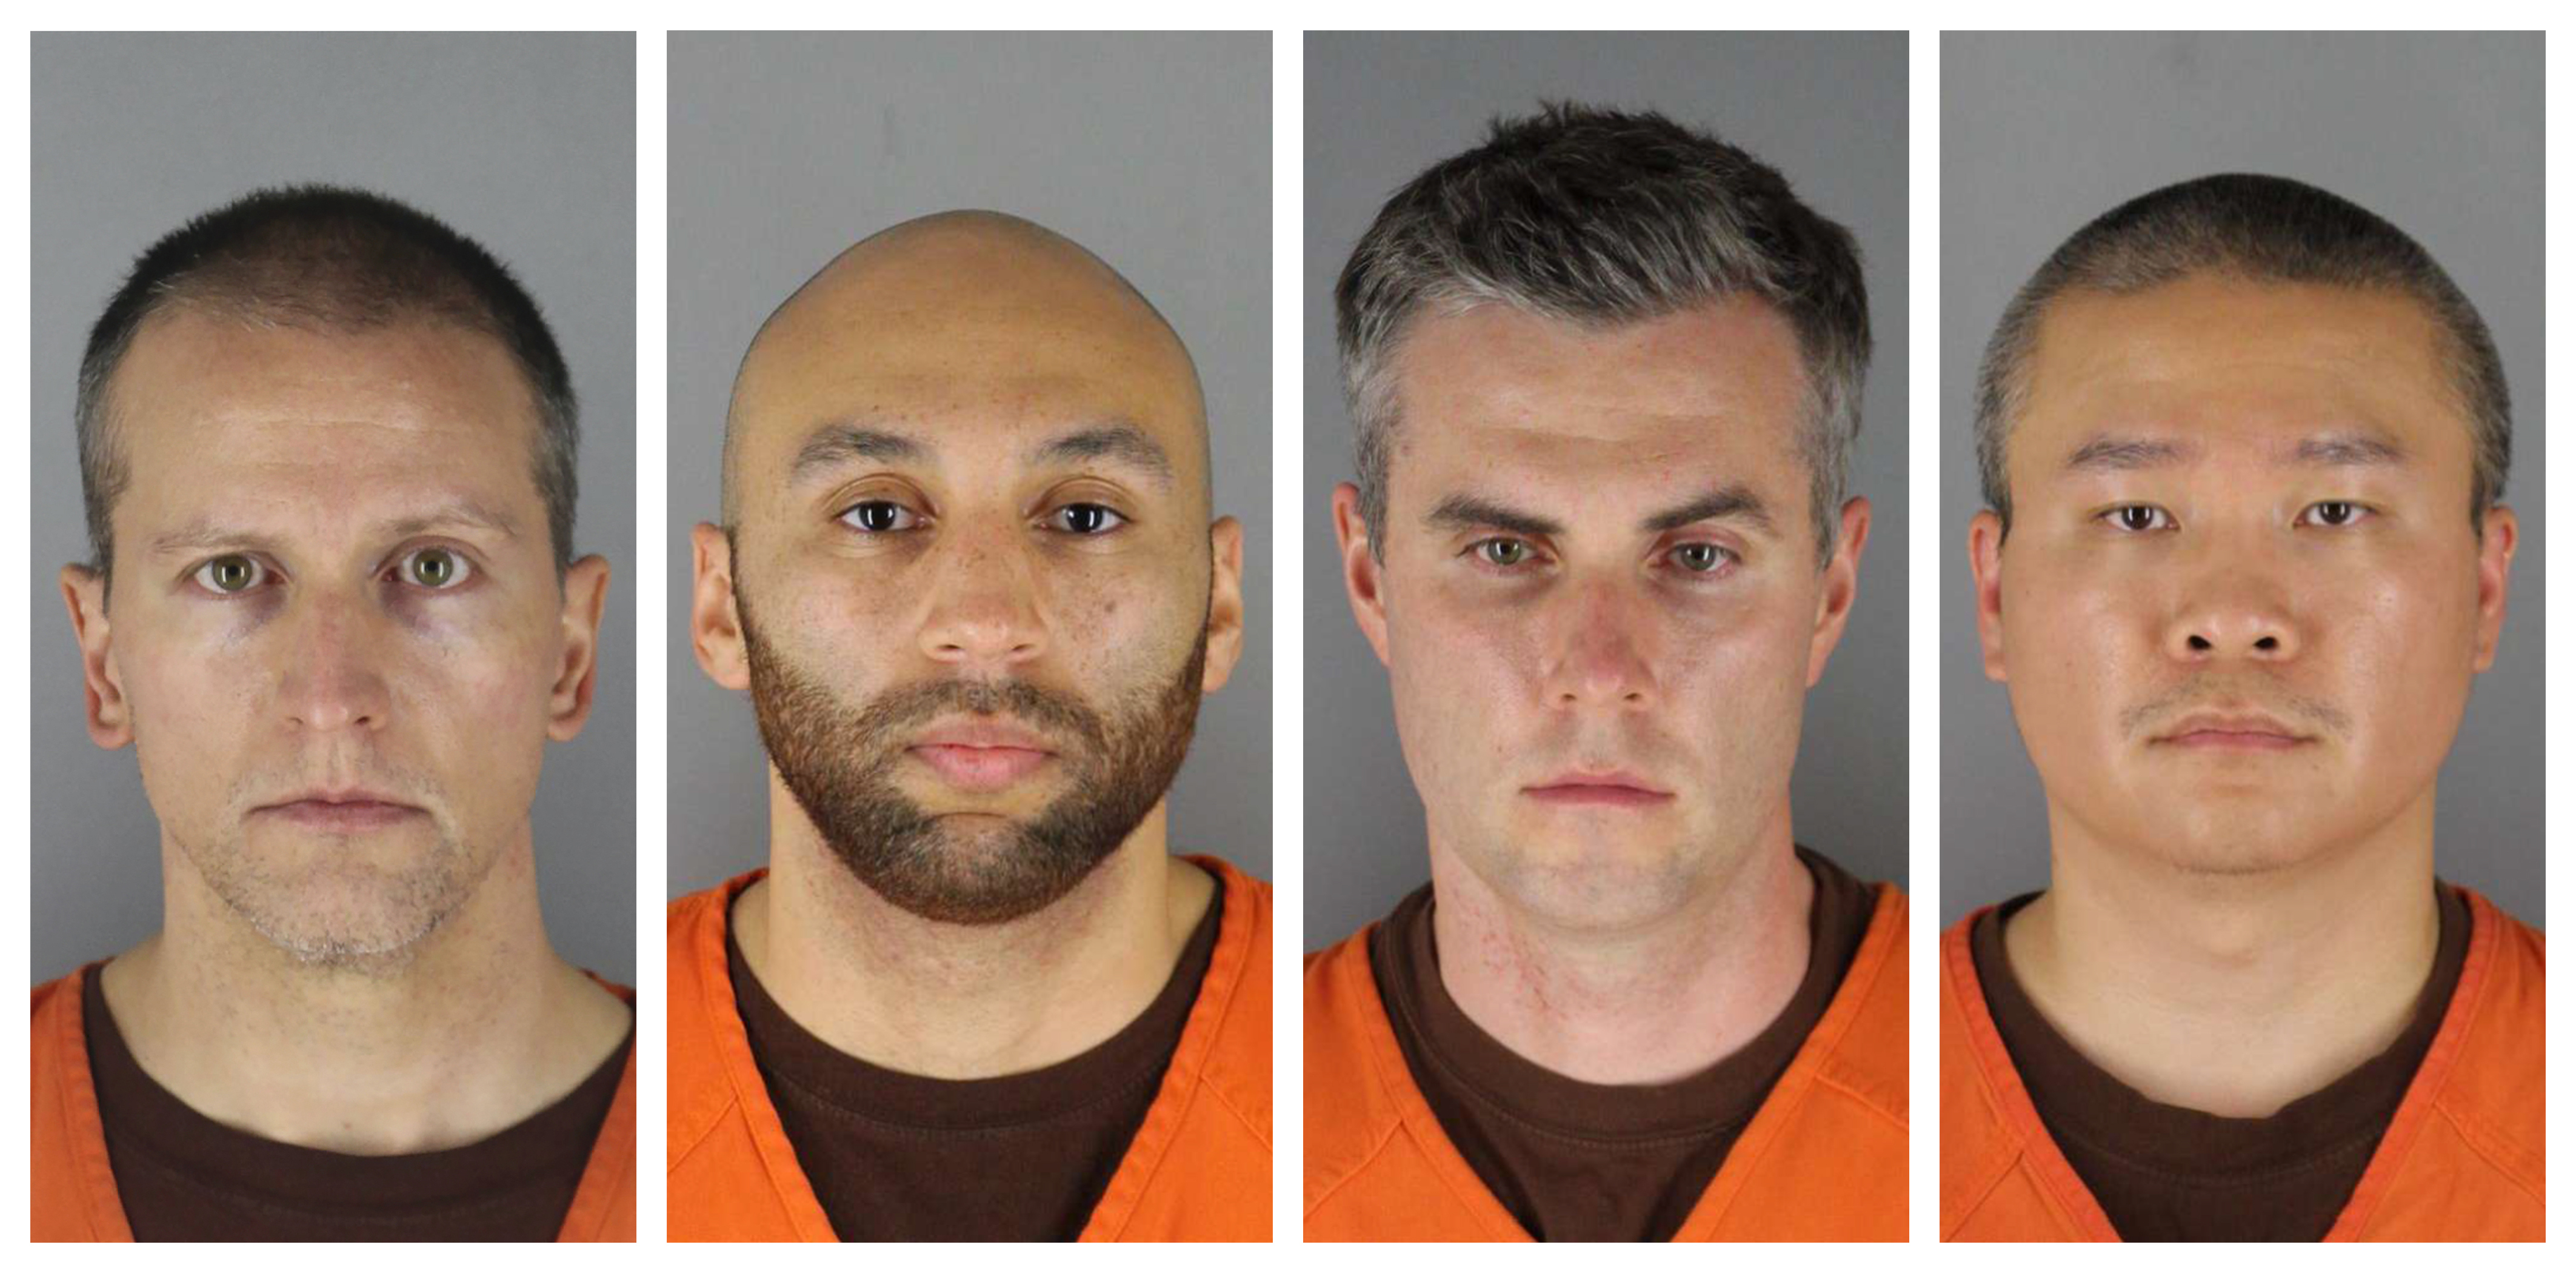 This combination of photos provided by the Hennepin County Sheriff's Office in Minnesota on Wednesday, June 3, 2020, shows Derek Chauvin, from left, J. Alexander Kueng, Thomas Lane and Tou Thao. Chauvin is charged with second-degree murder of George Floyd, a black man who died after being restrained by him and the other Minneapolis police officers on May 25. Kueng, Lane and Thao have been charged with aiding and abetting Chauvin. (Hennepin County Sheriff's Office via AP)